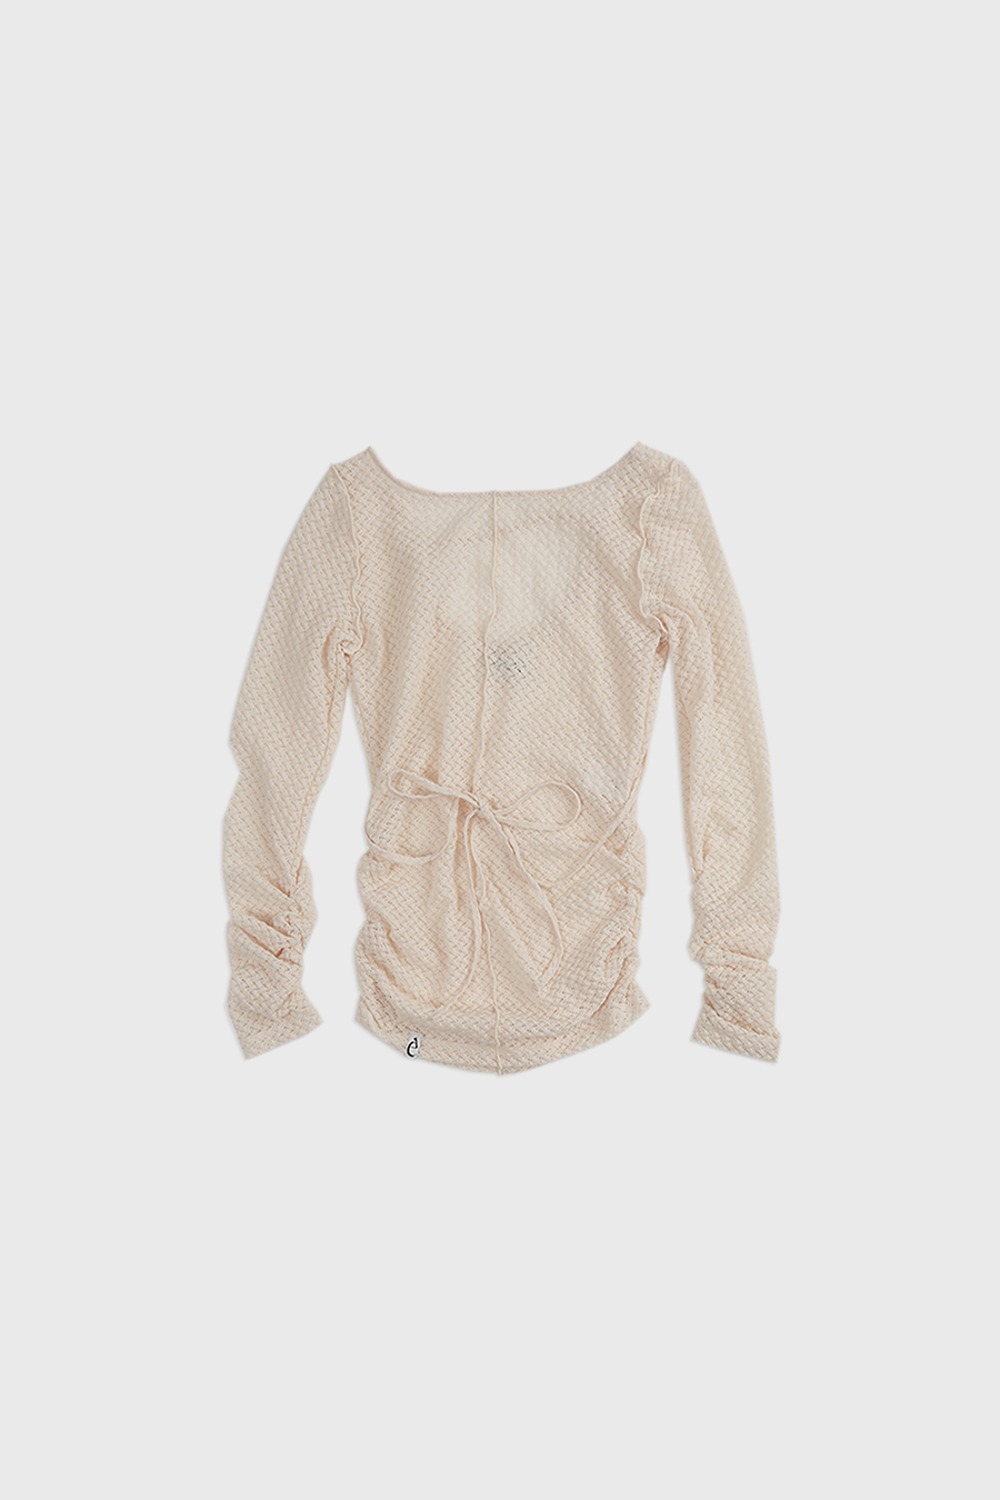 (23FW) MUSED TIED JERSEY TOP CREAM LACE